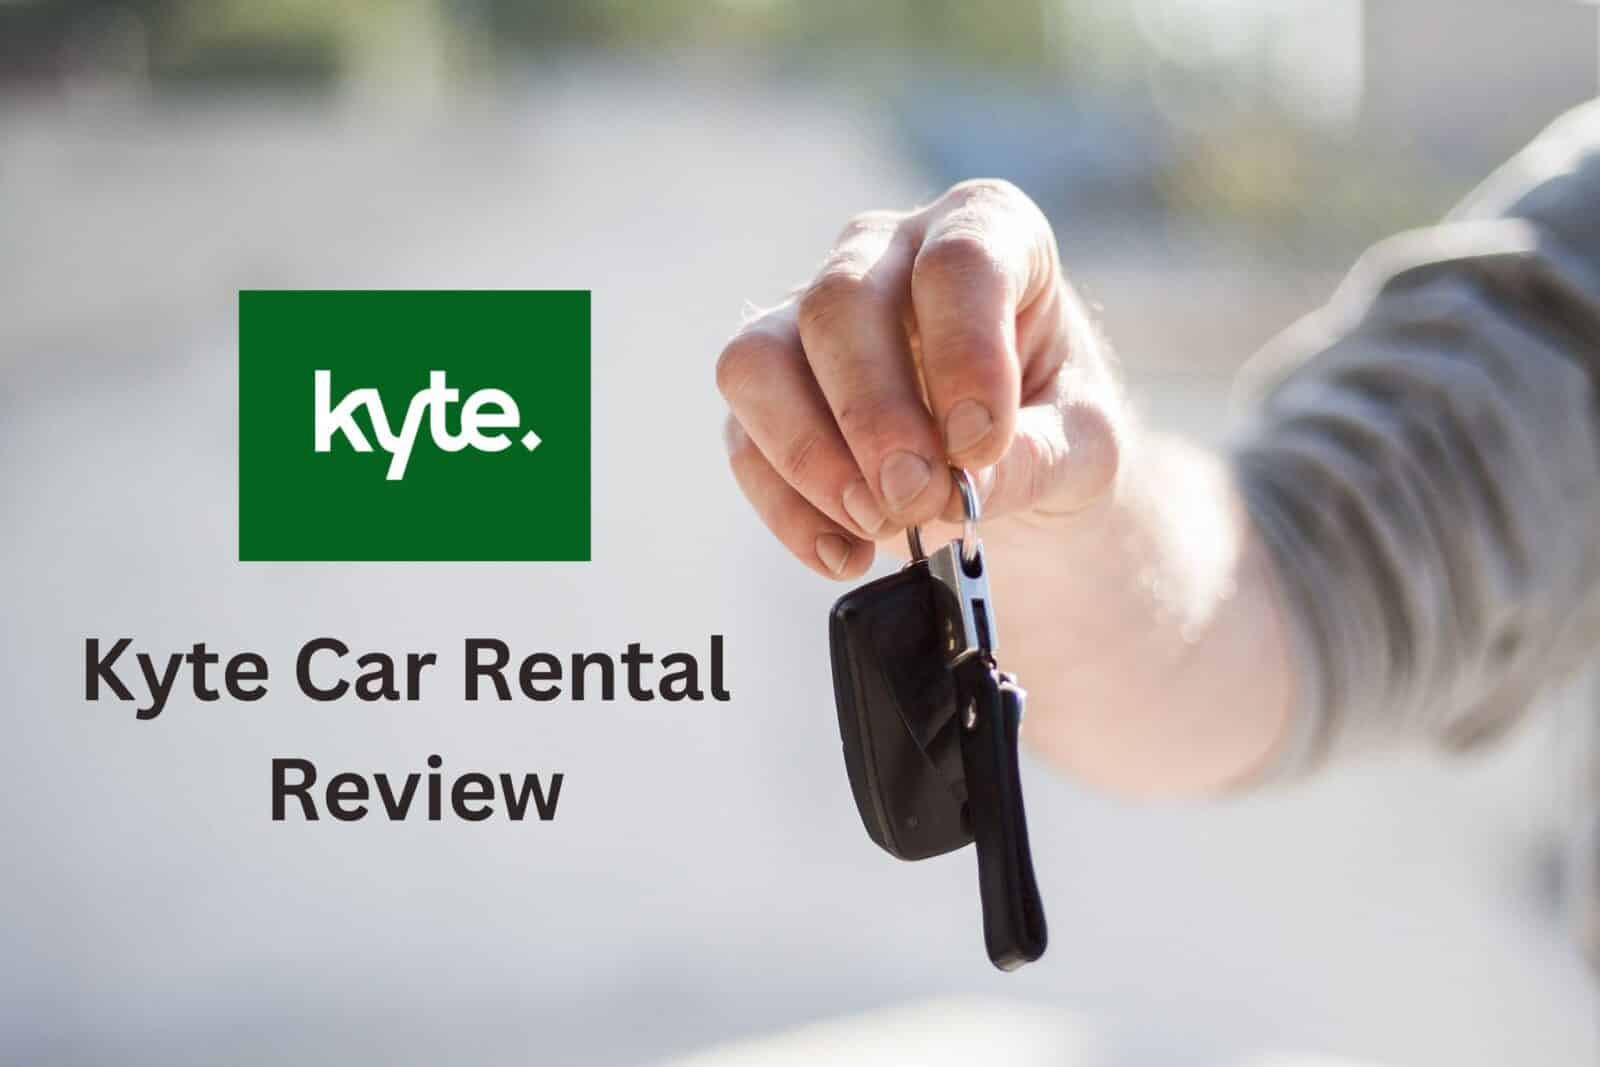 Kyte Car Rental Review: Is the Rental Service Safe for Use?